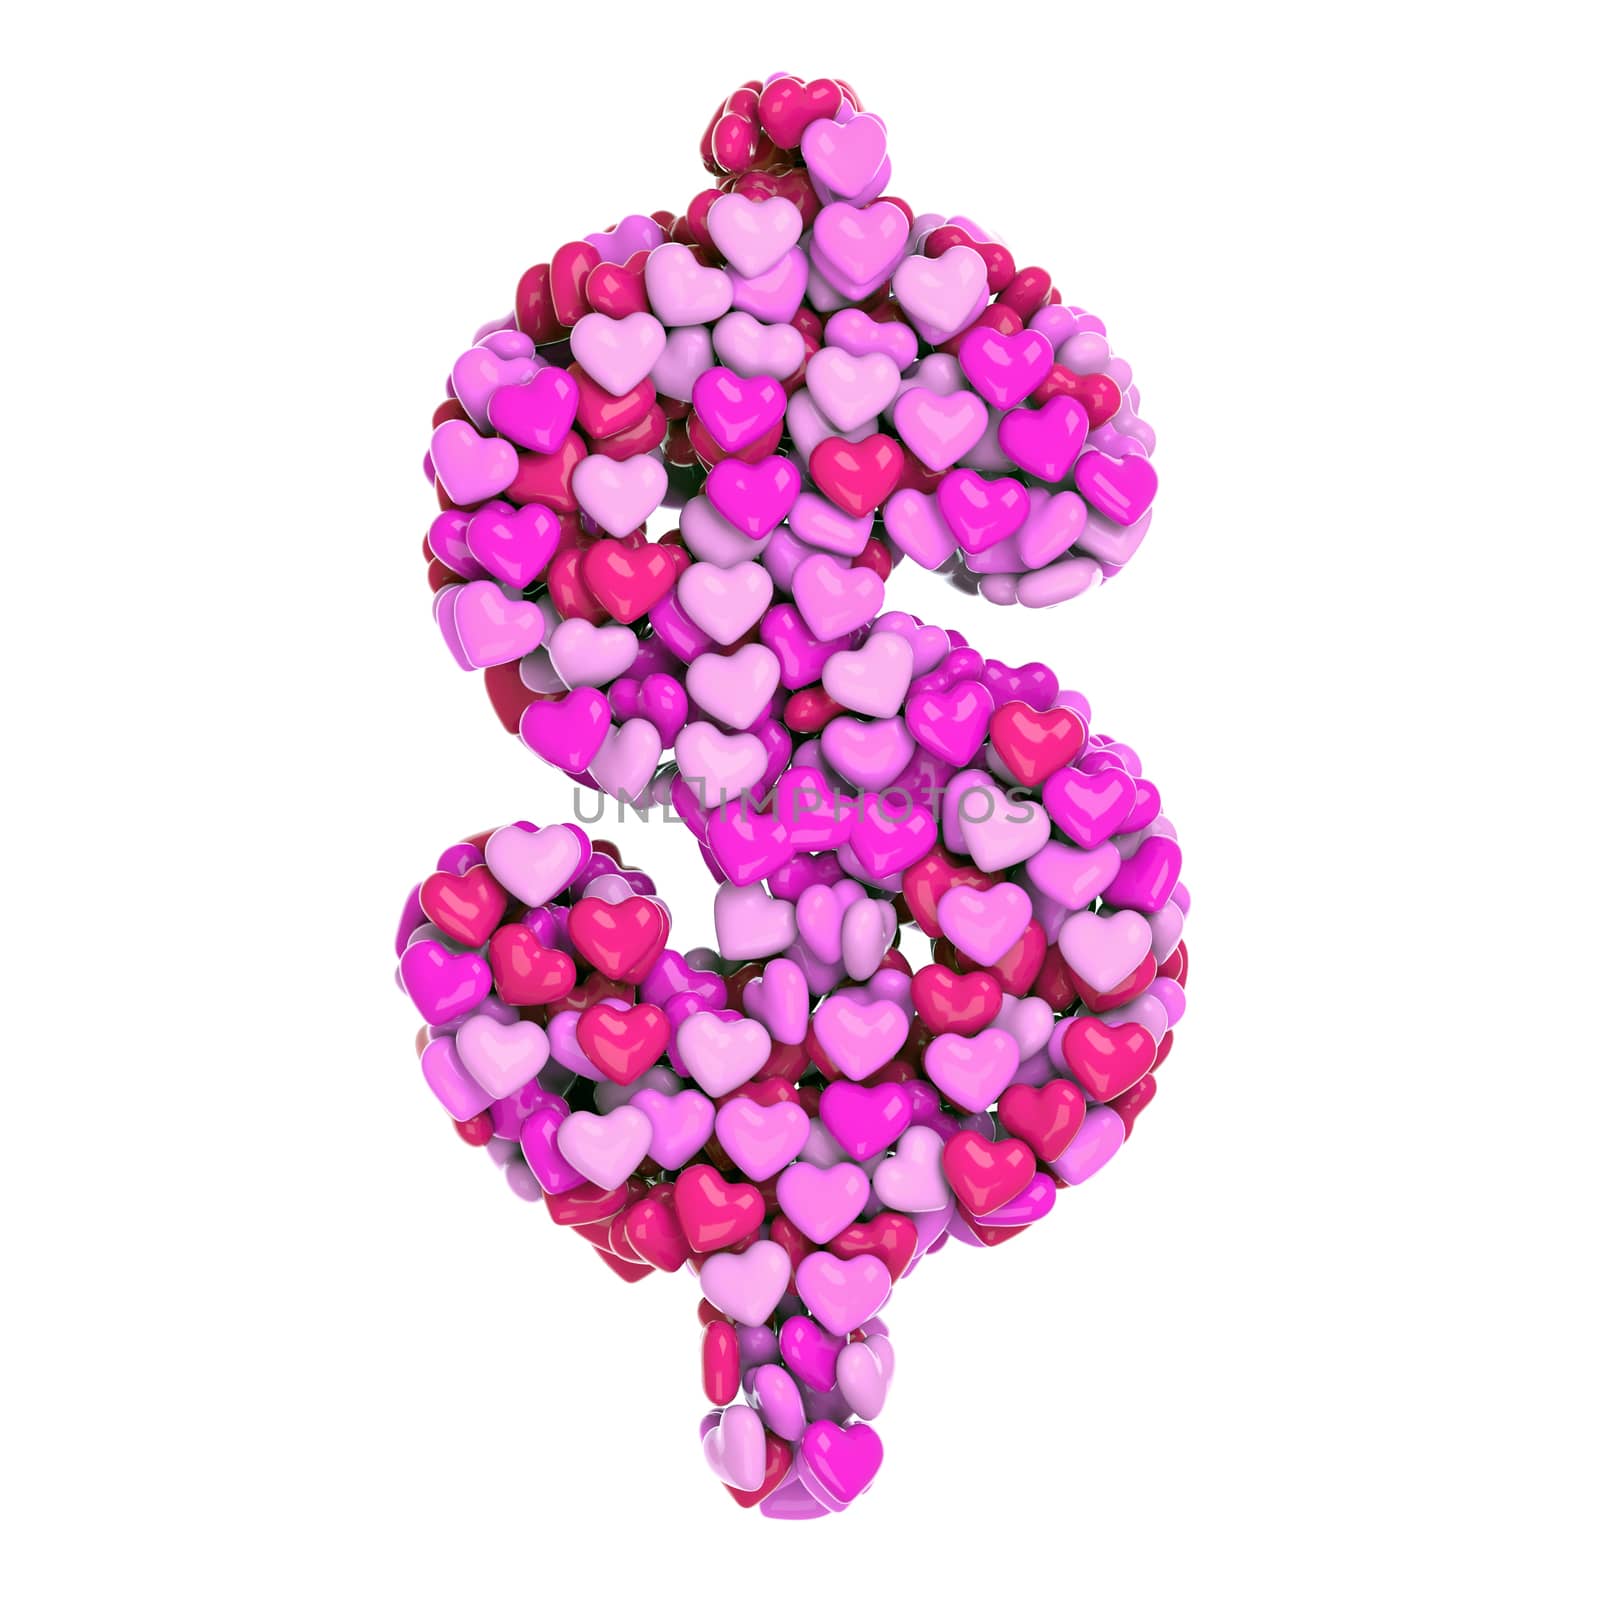 Valentine dollar currency sign -  3d pink hearts symbol - Love, passion or wedding concept by chrisroll